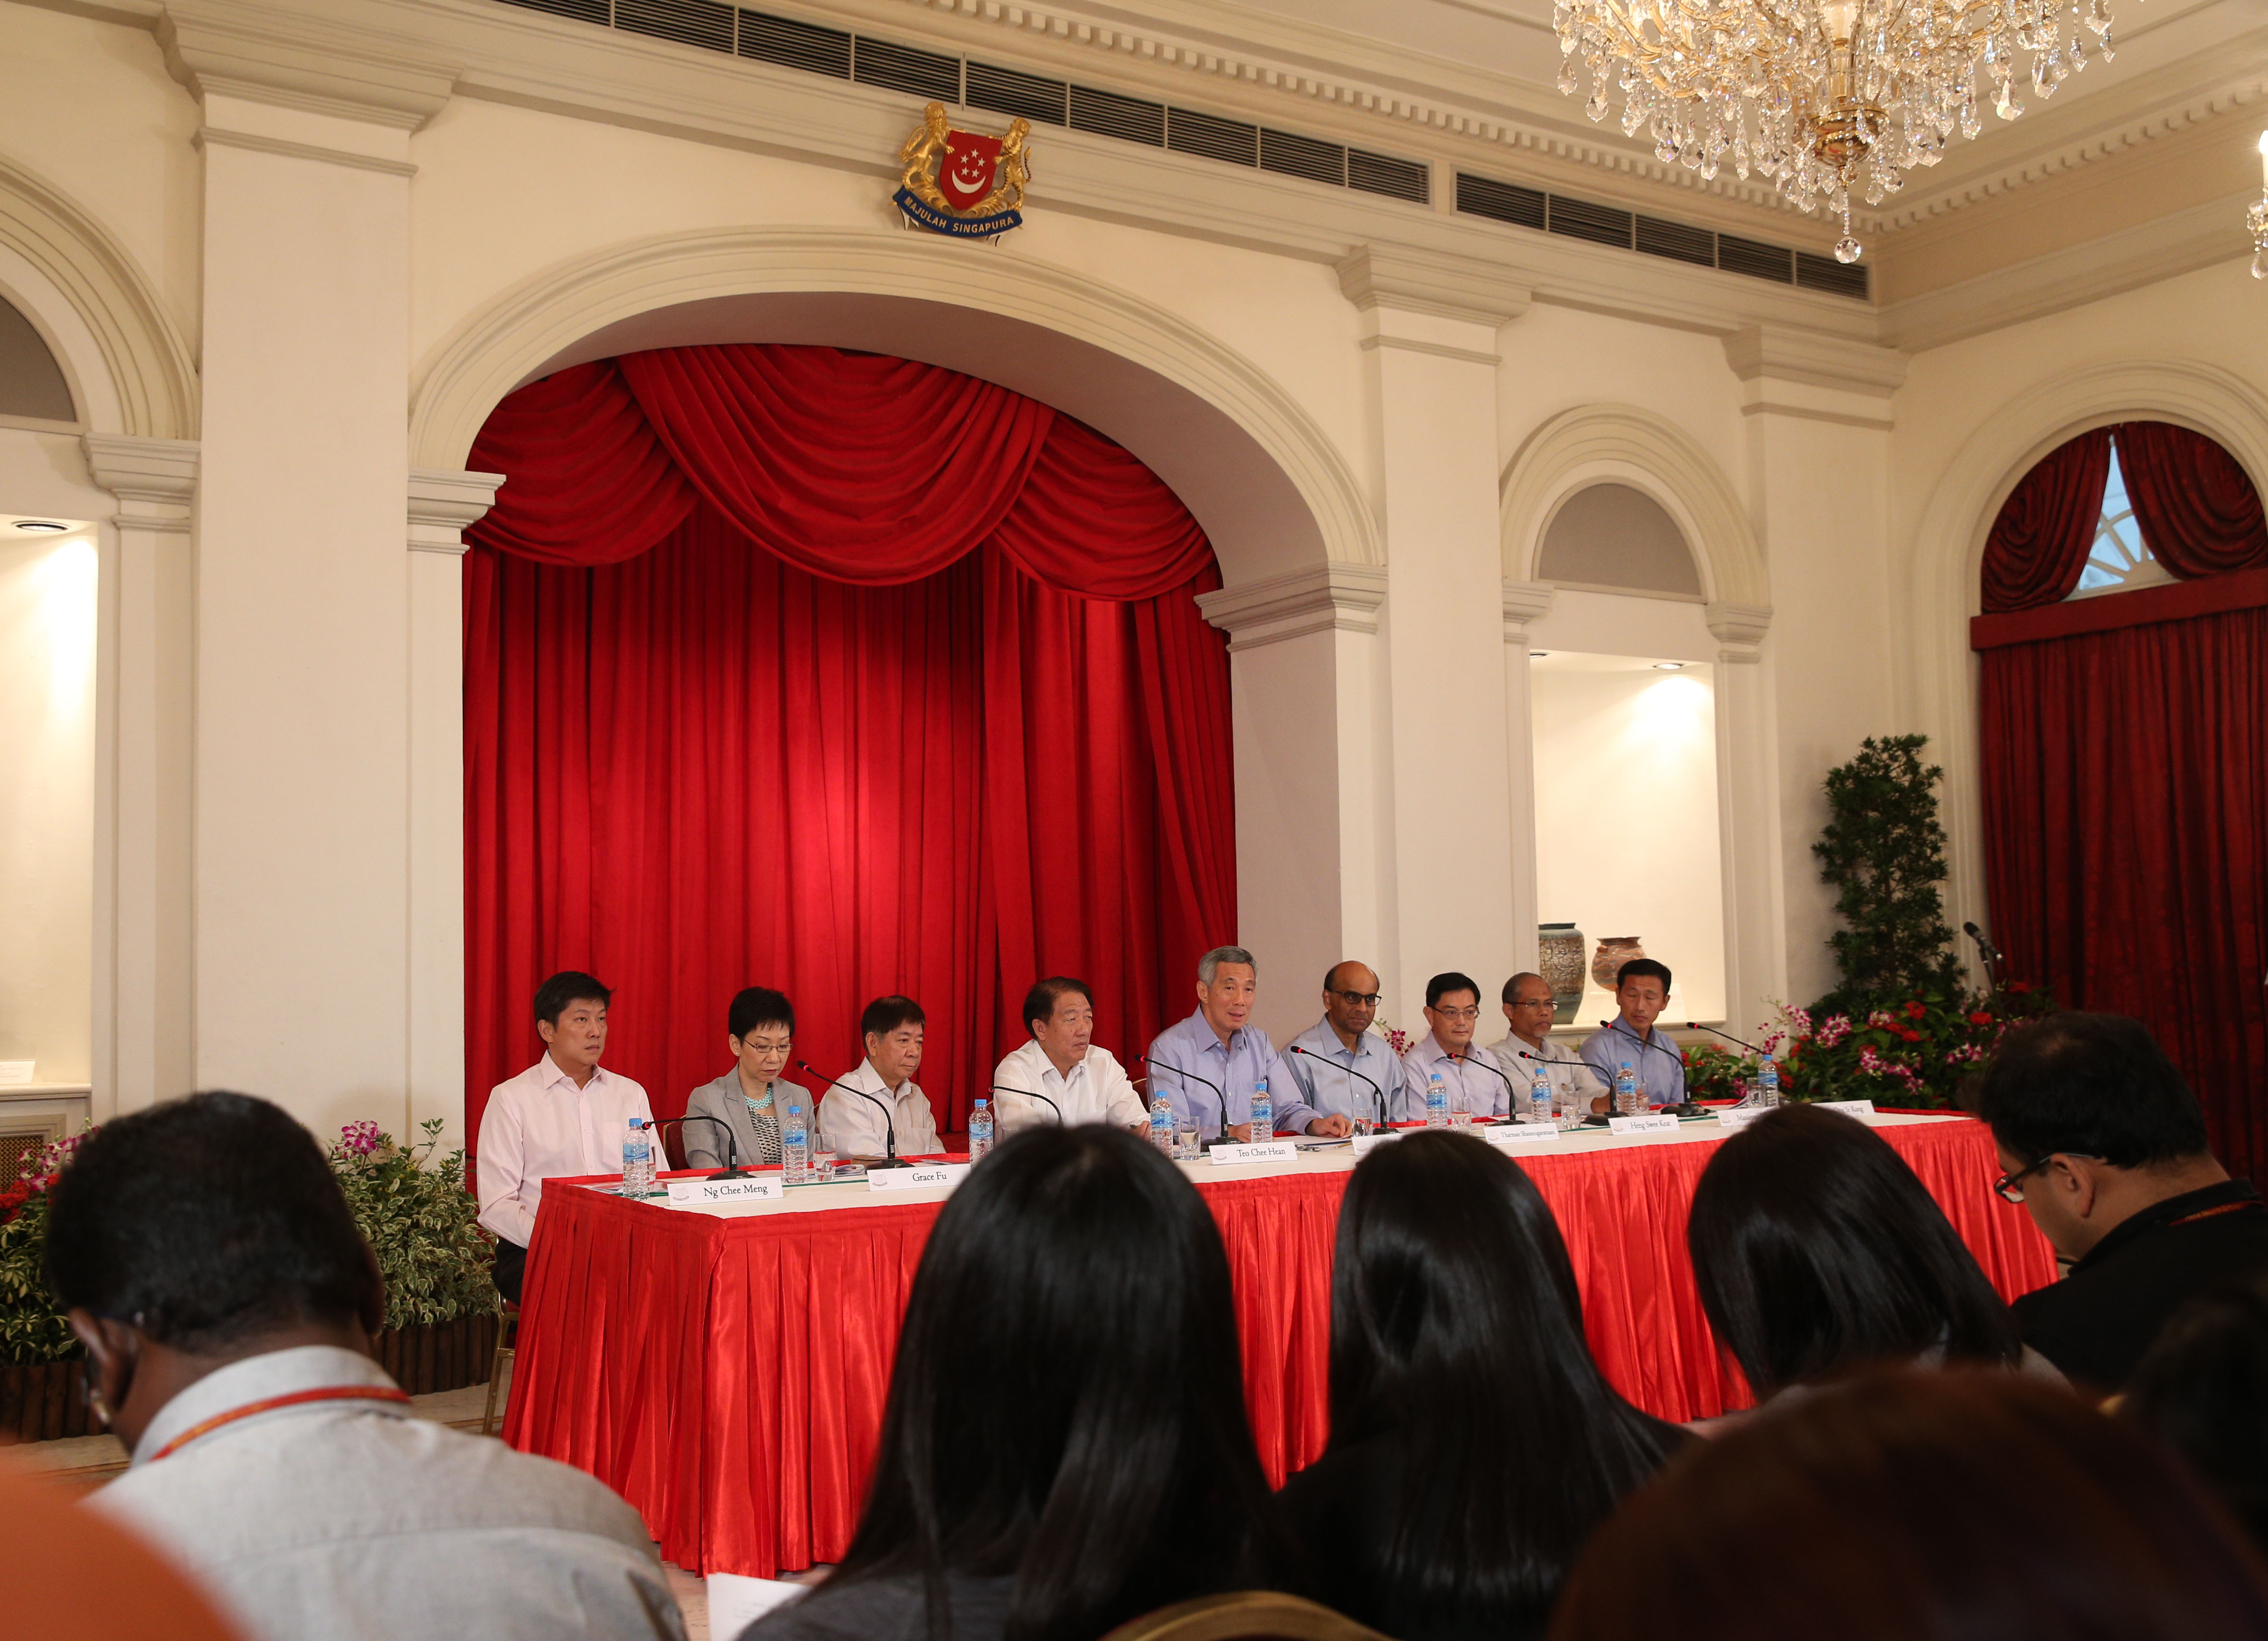 Press Conference on new Cabinet Line-Up on 28 September 2015 (MCI Photo by Terence Tan)